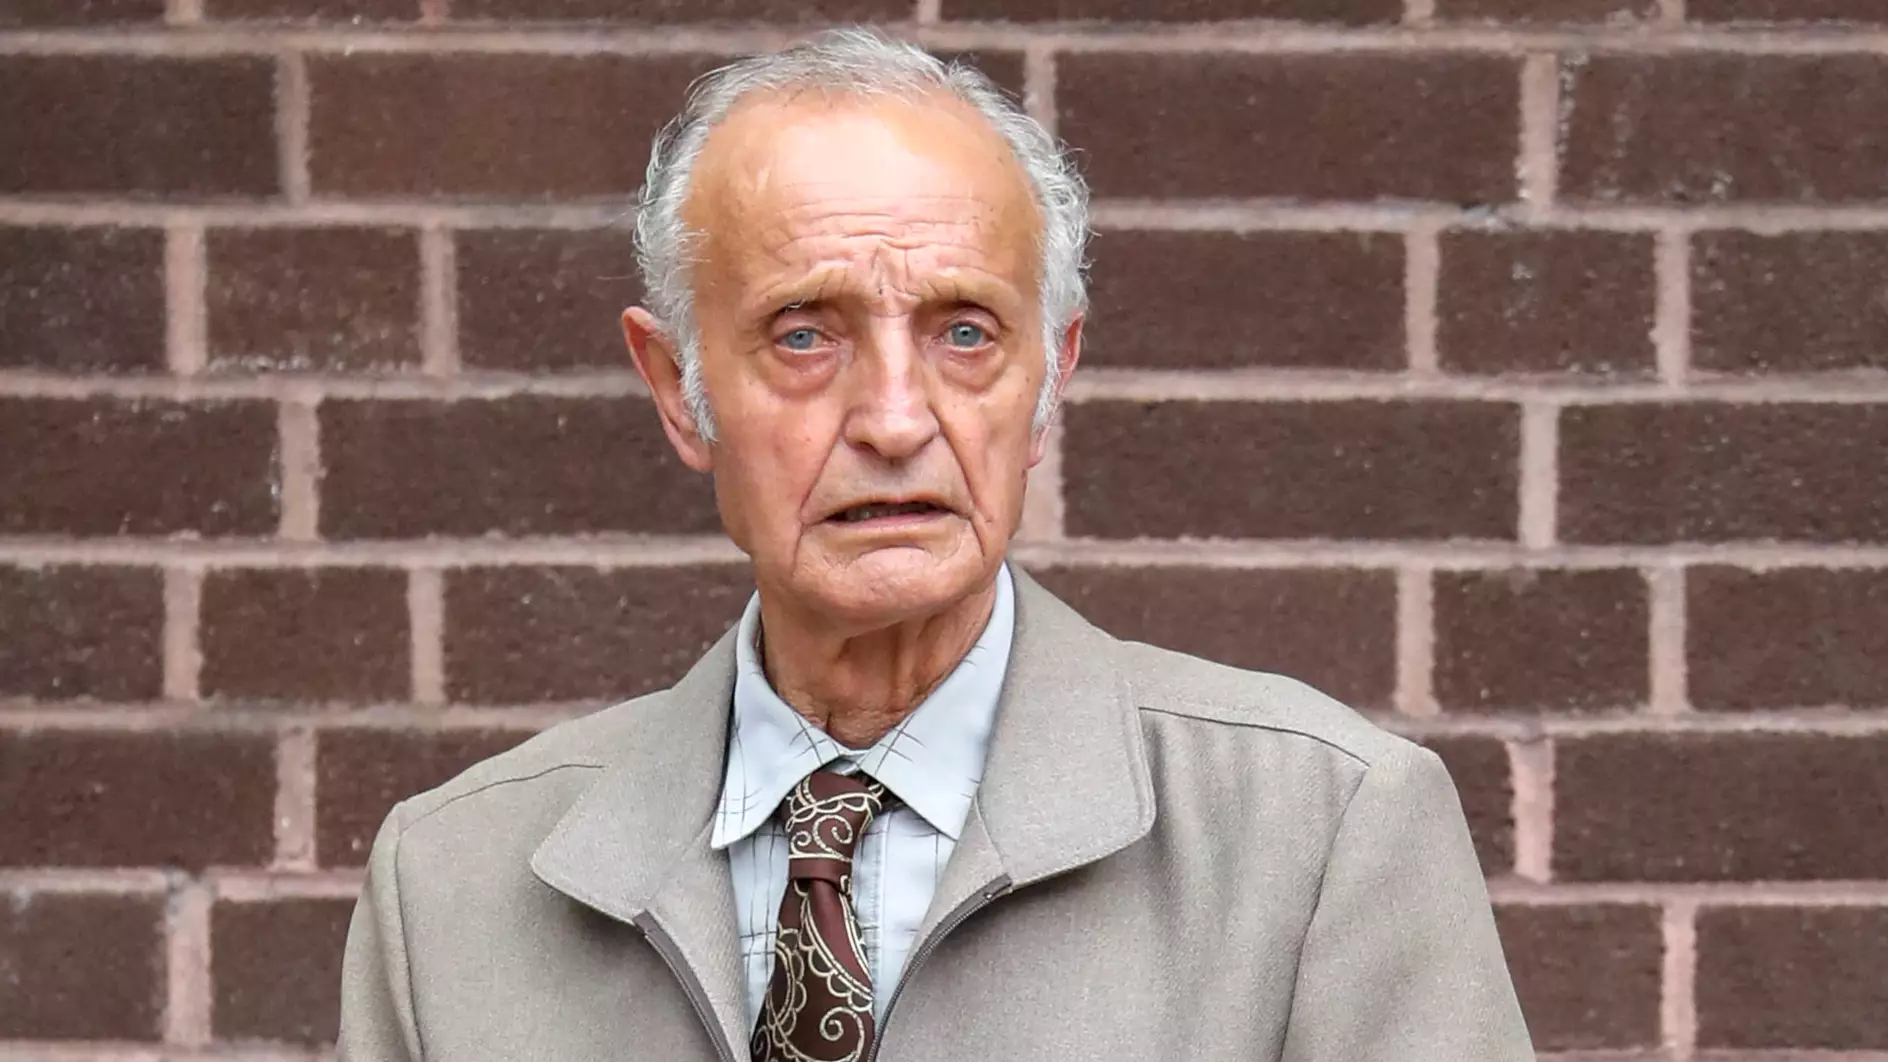 Pensioner Jailed After Becoming Dealer's Getaway Driver Because He Was Lonely